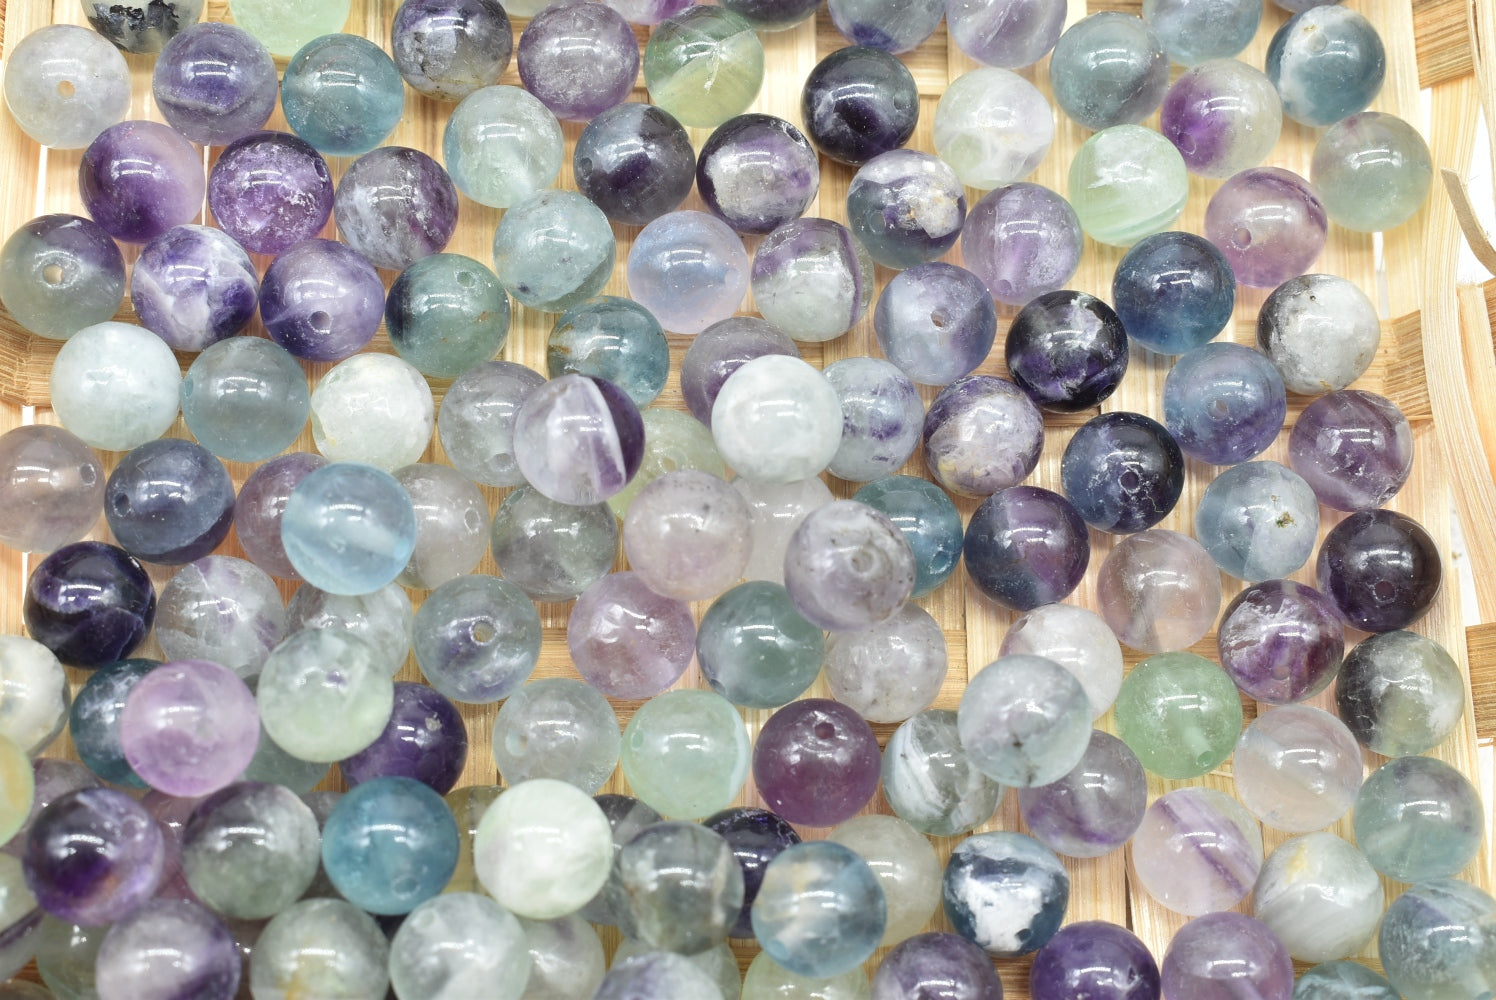 8 mm Perforated Fluorite Beads - 5 Beads